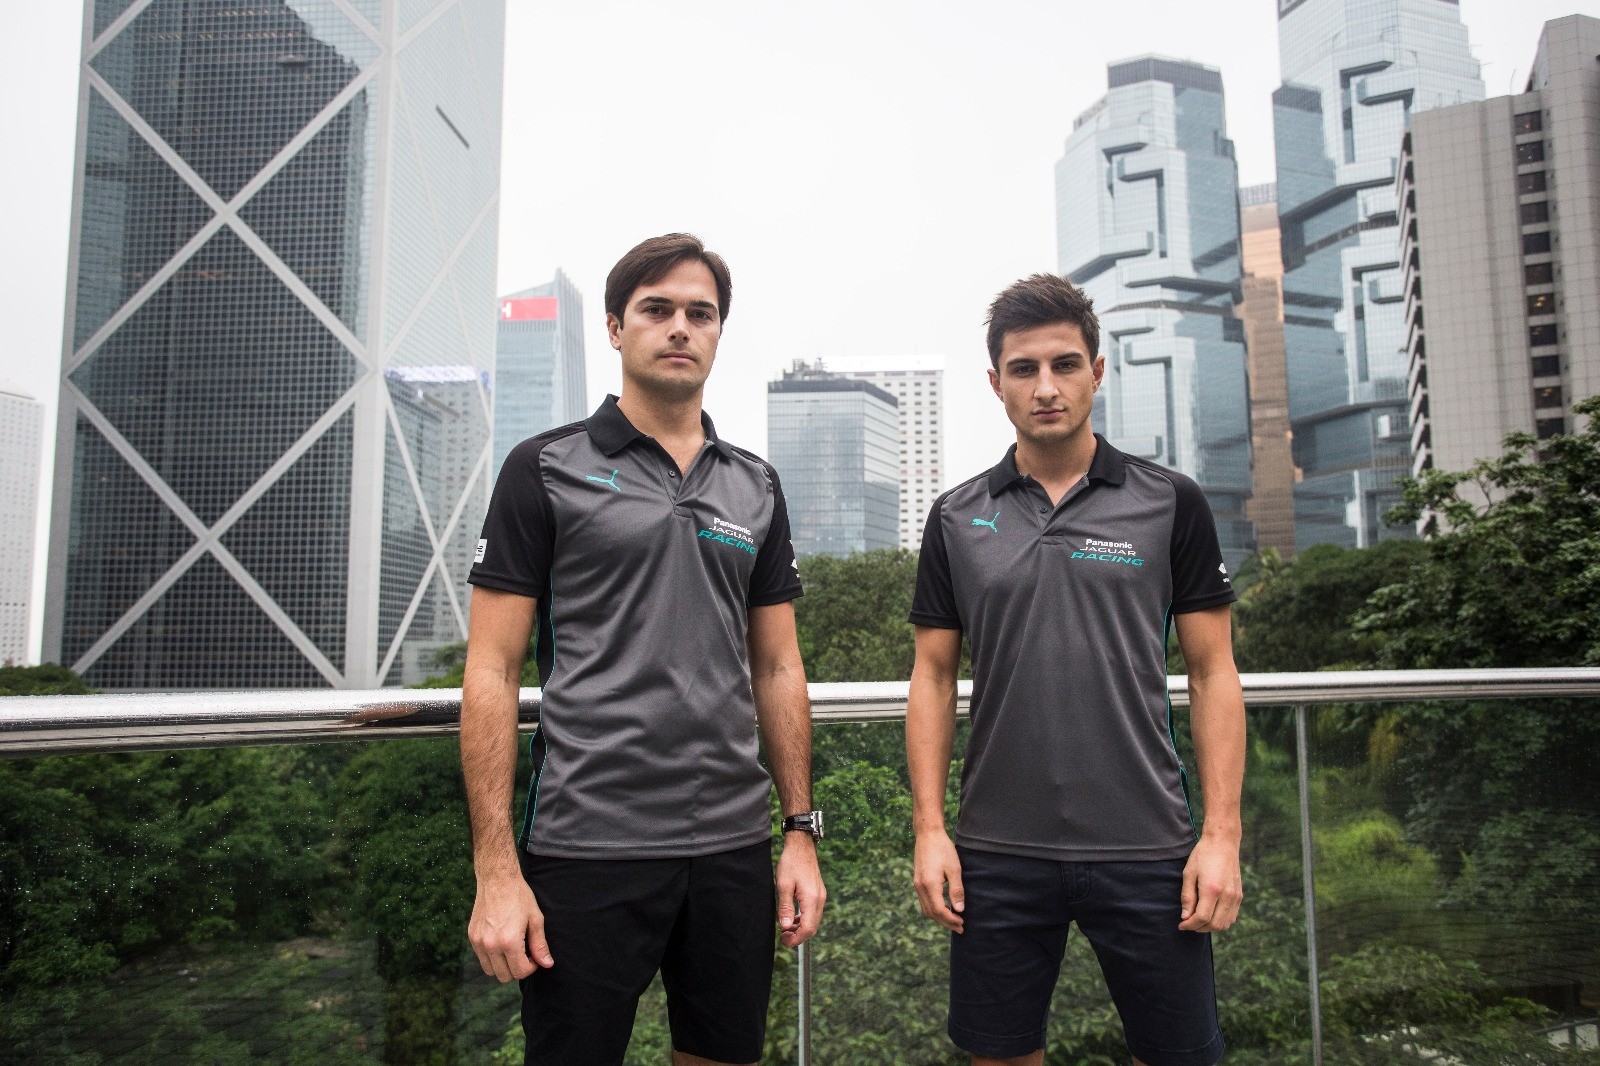 Mitch Evans (right) is one half of the Panasonic Jaguar Racing team with Nelson Piquet Jnr. Photo: Handout